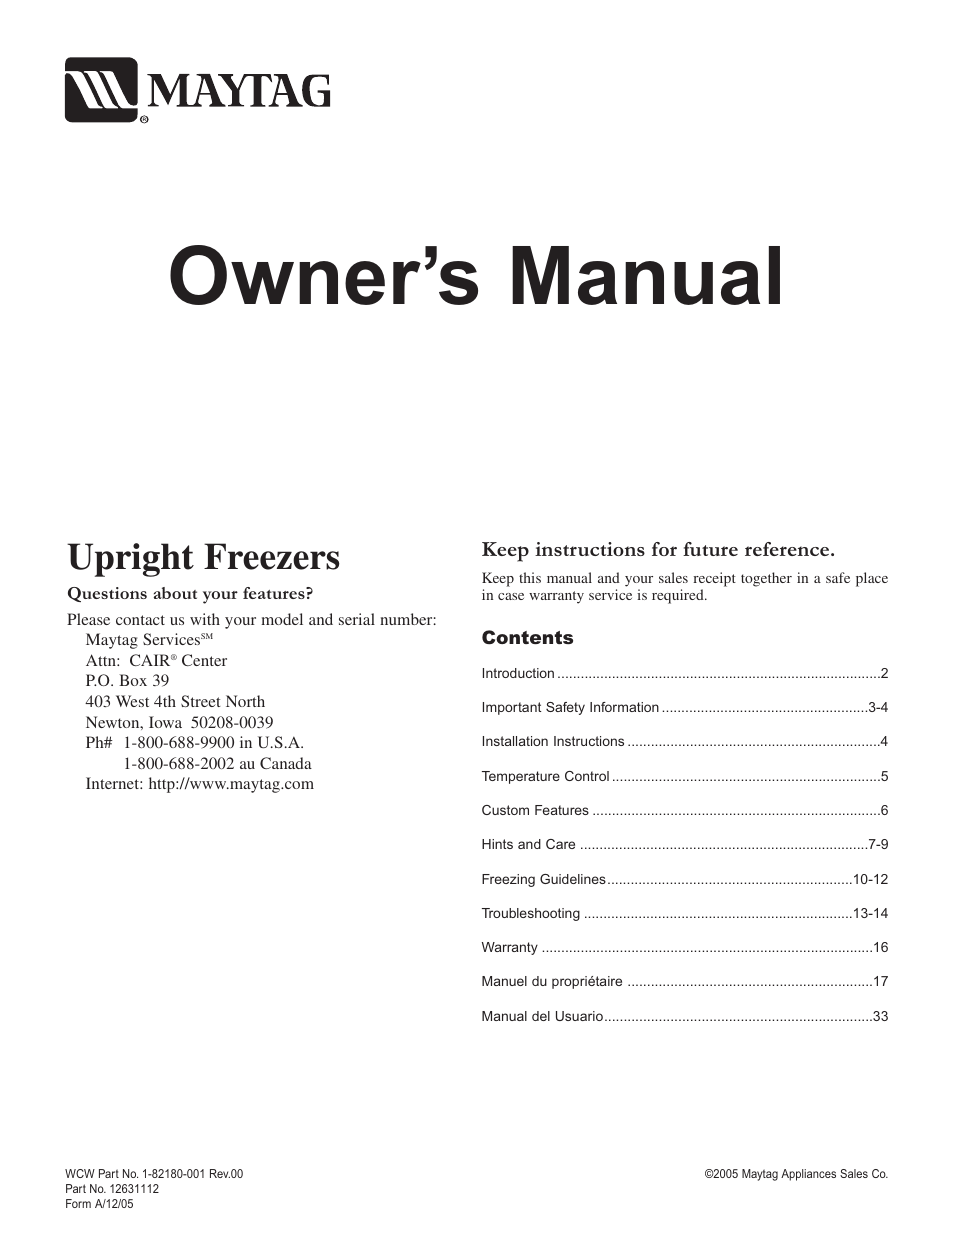 Maytag Upright Freezers User Manual | 48 pages